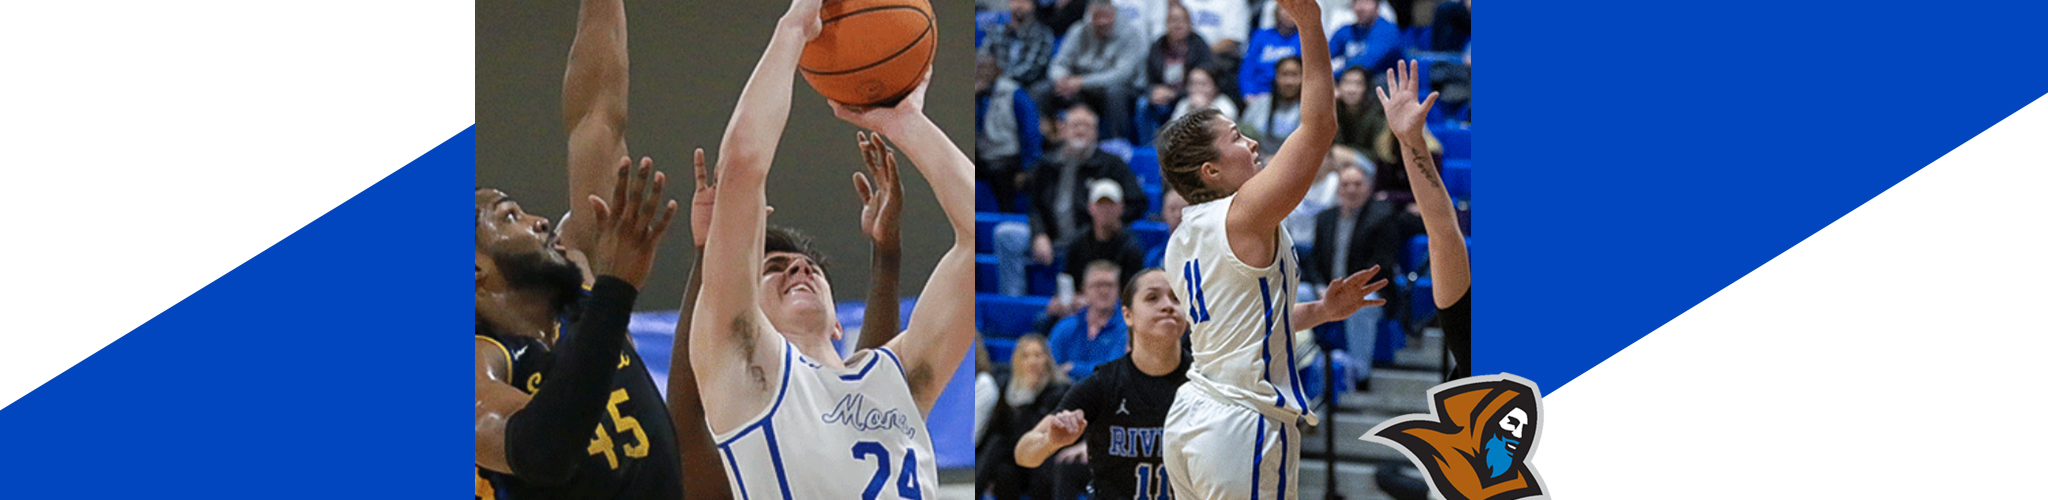 Men's and women's basketball teams play in the GNAC tournaments